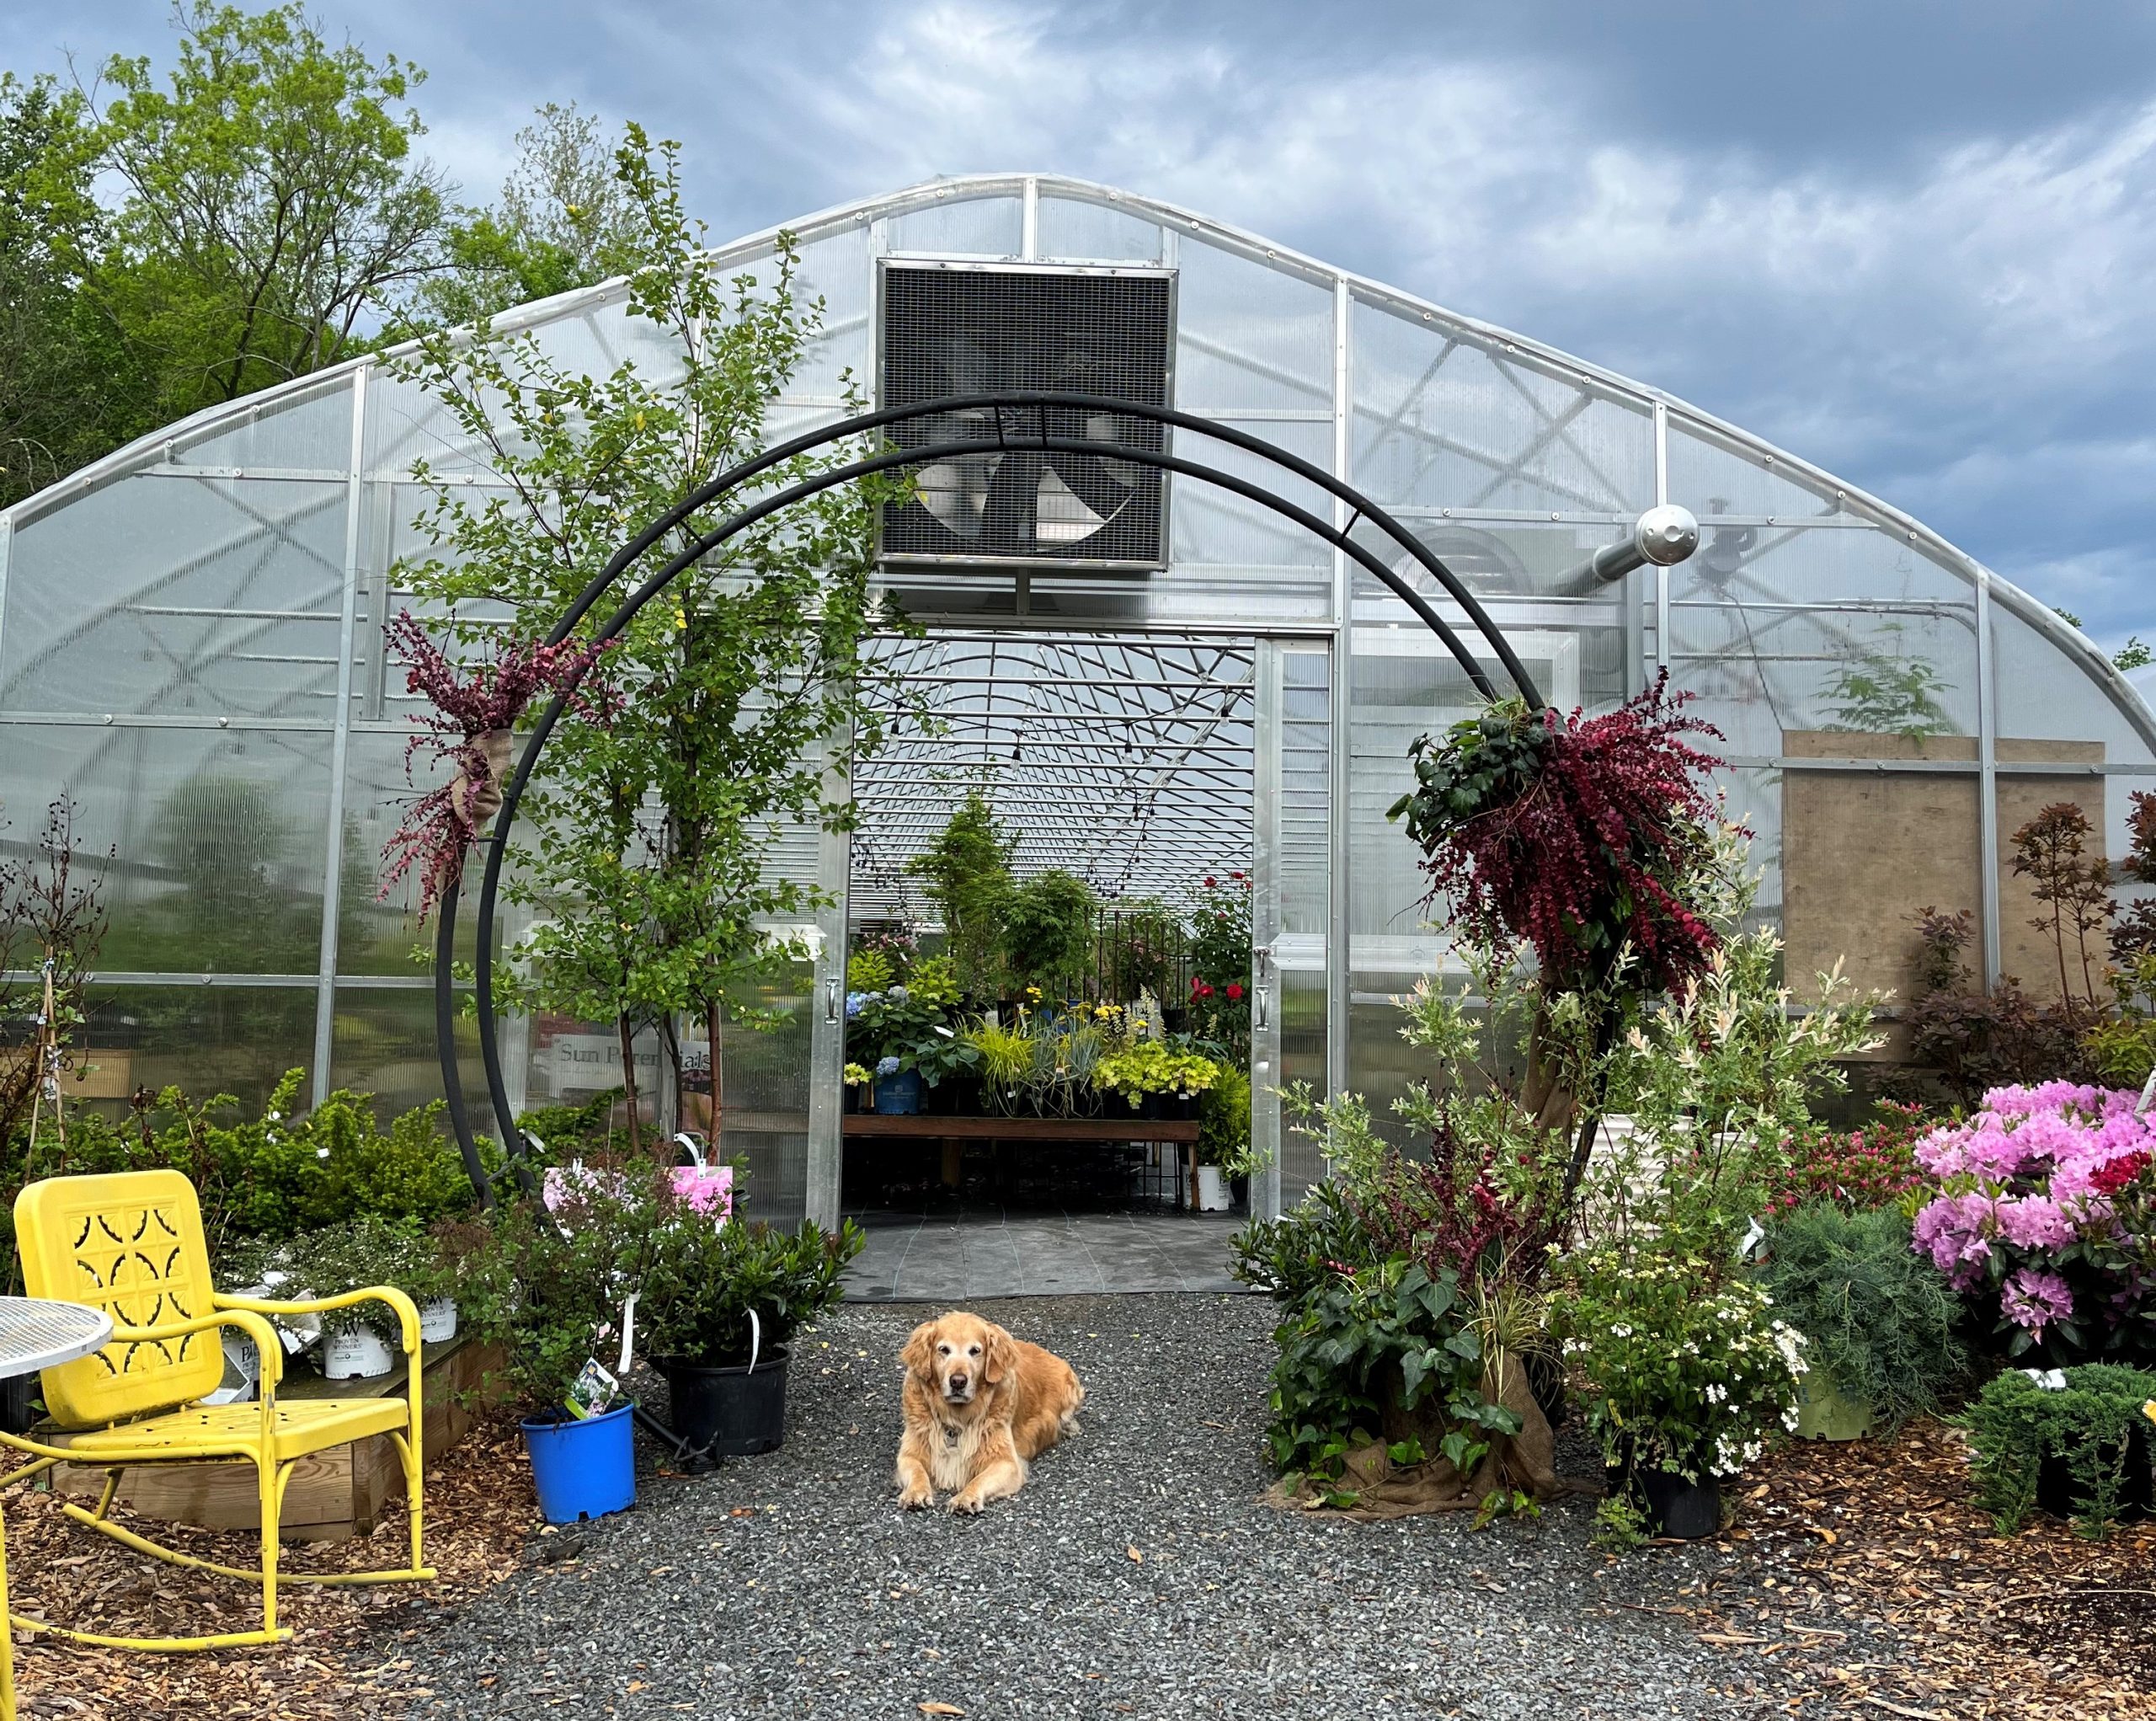 Entrance to one of Tudbinks' greenhouses with a greenery decorated round archway and a golden retriever laying on the ground.